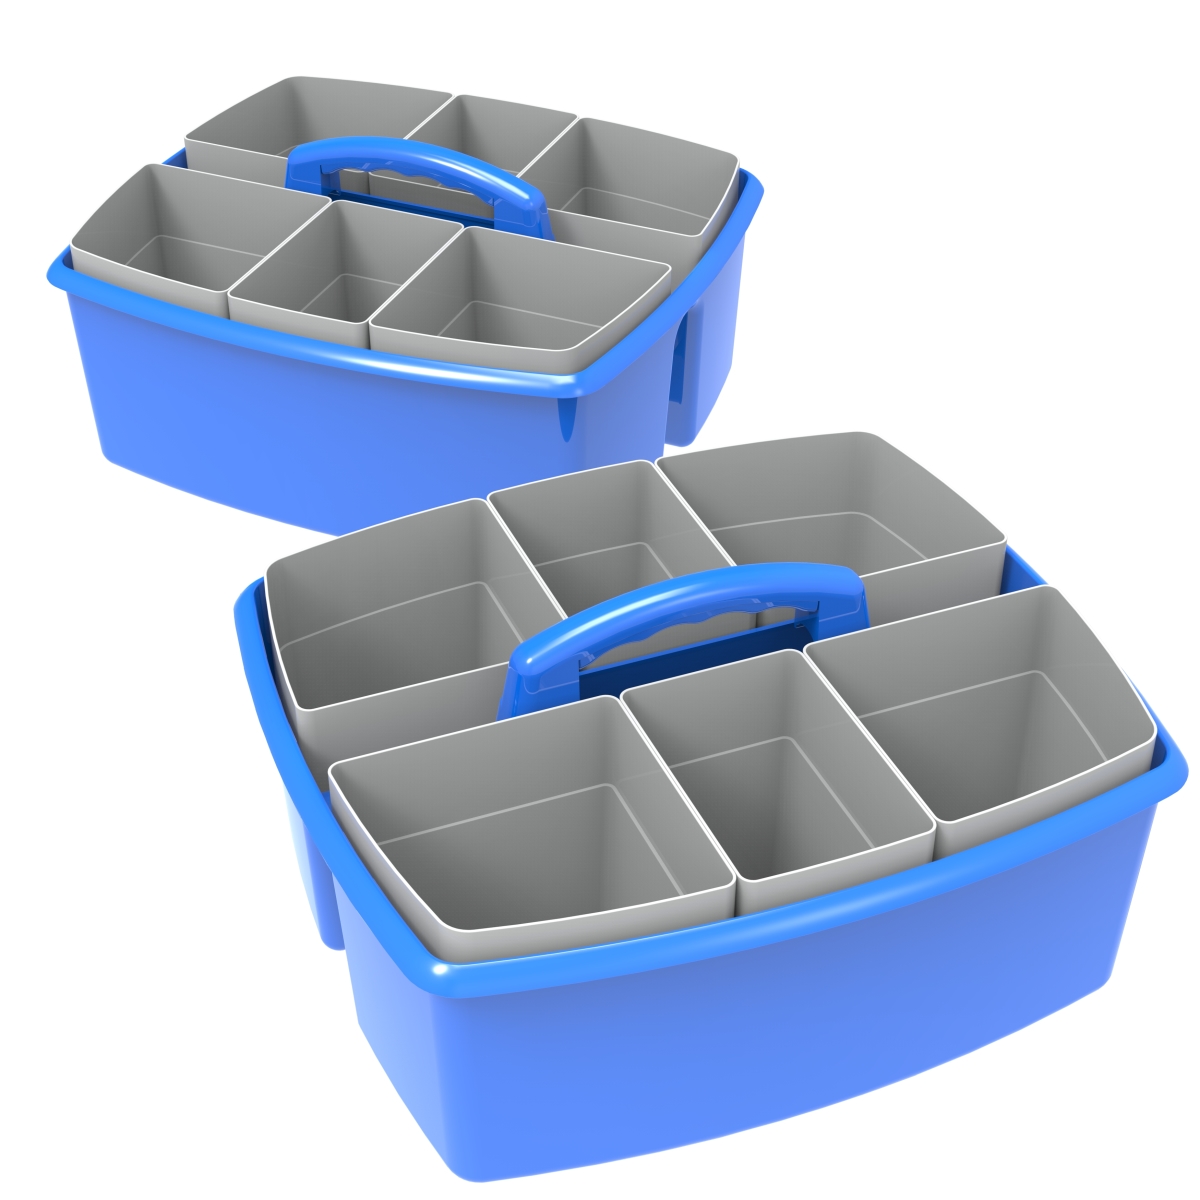 Picture of Storex 00985U02C Large Caddy with Sorting Cups, Blue - Pack of 2